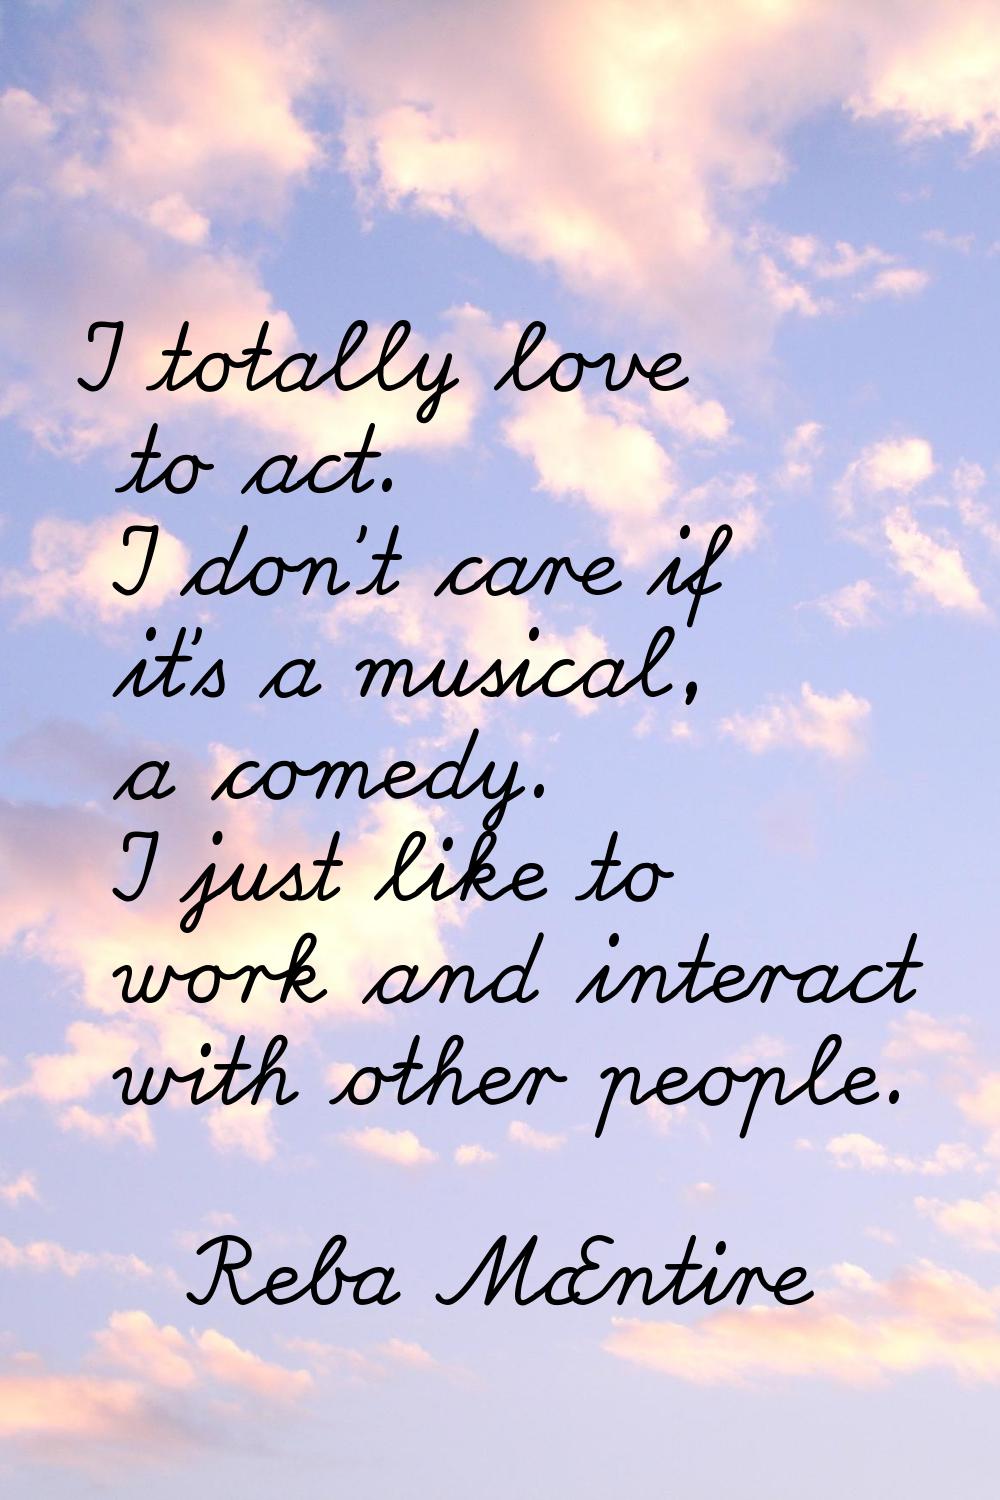 I totally love to act. I don't care if it's a musical, a comedy. I just like to work and interact w